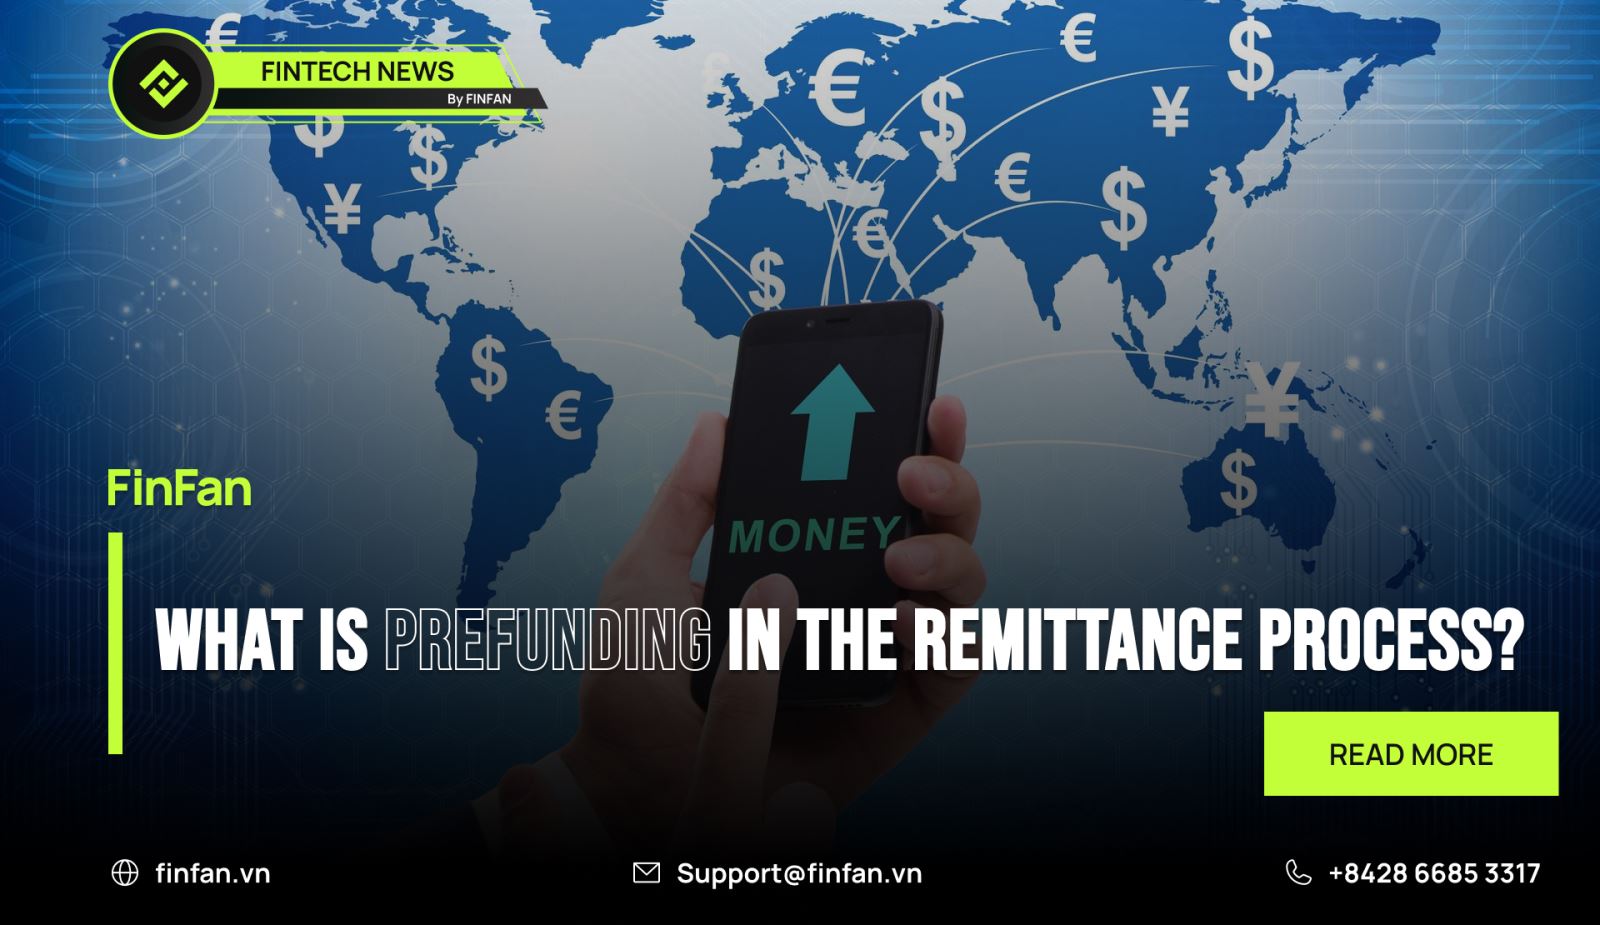 What is Prefunding in the Remittance Process?